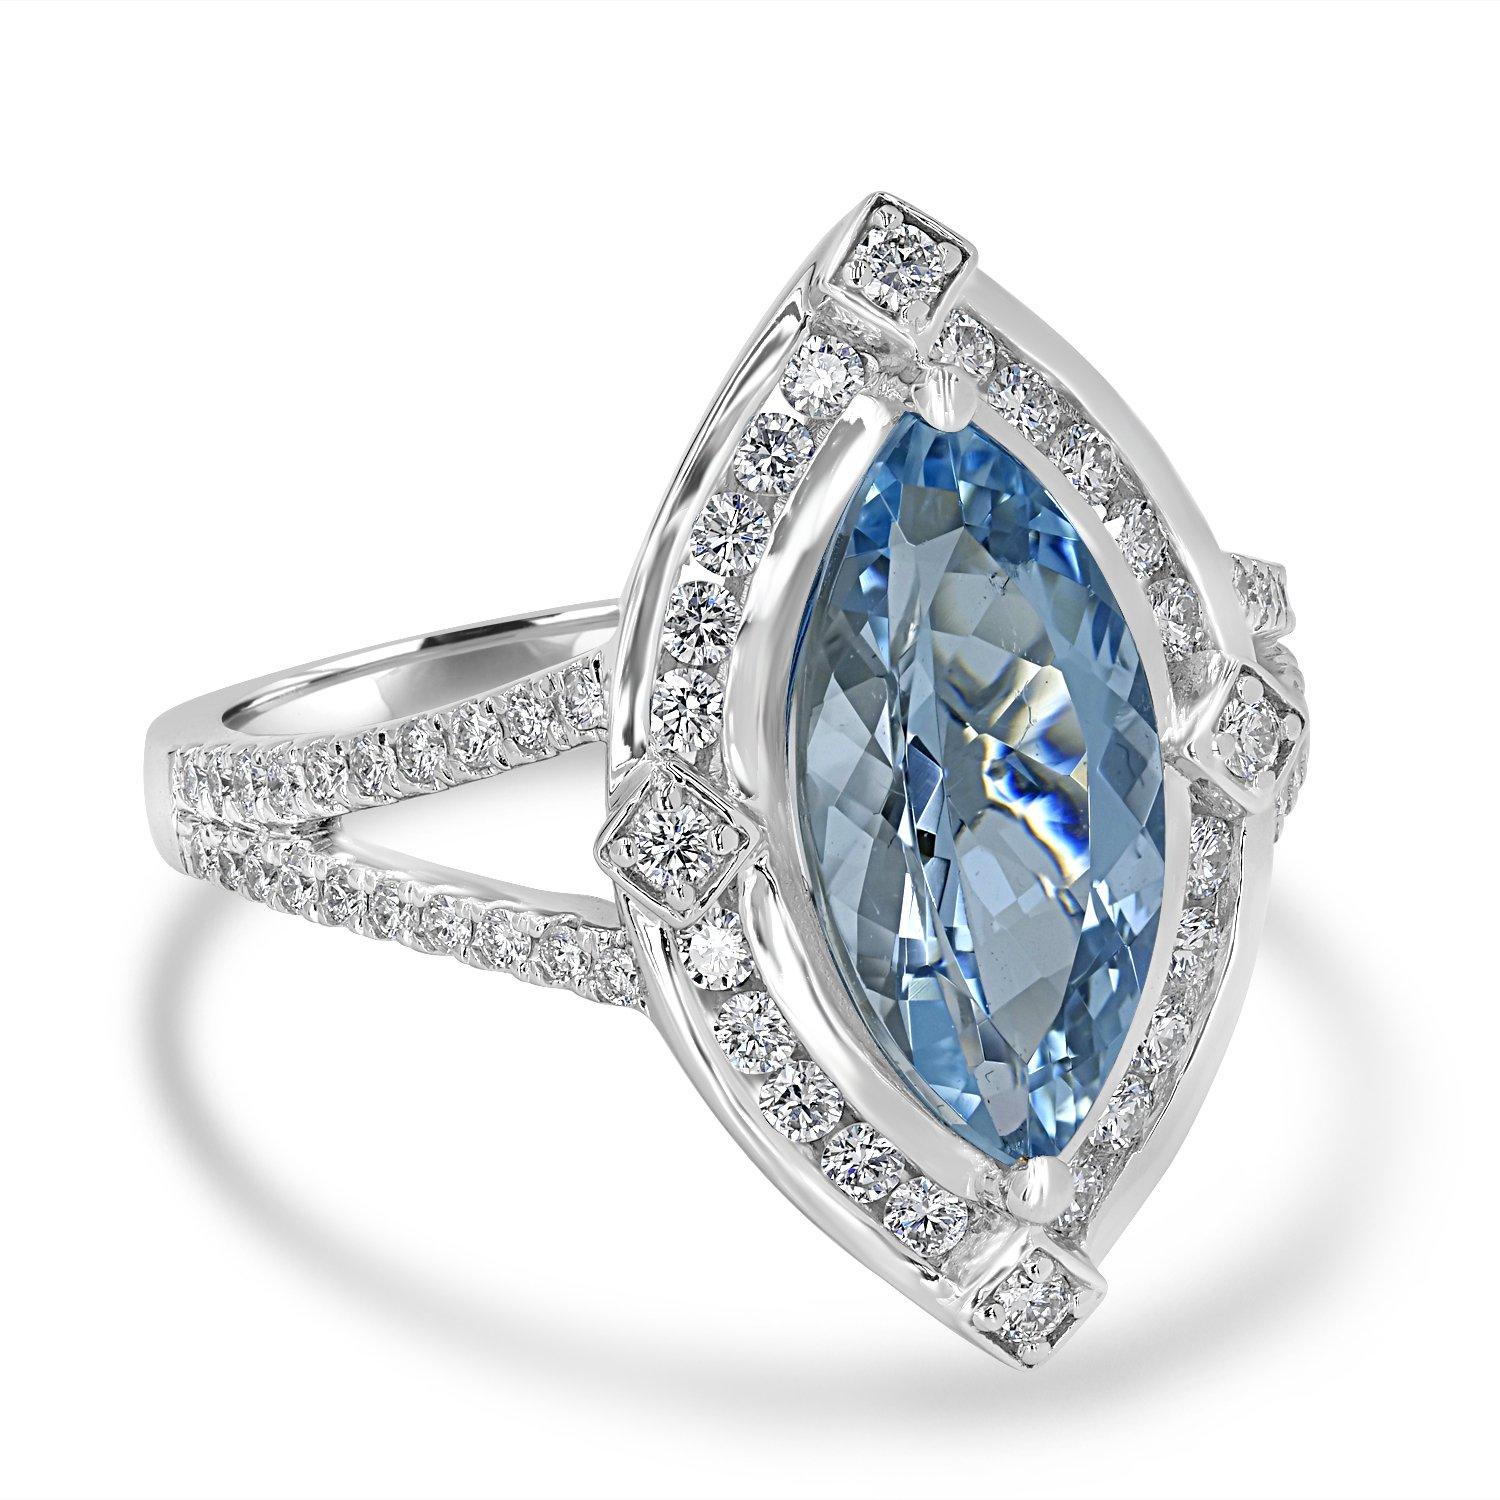 Marquise Cut 2.23ct Aquamarine Ring with 0.52Tct Diamonds Set in 14K White Gold For Sale